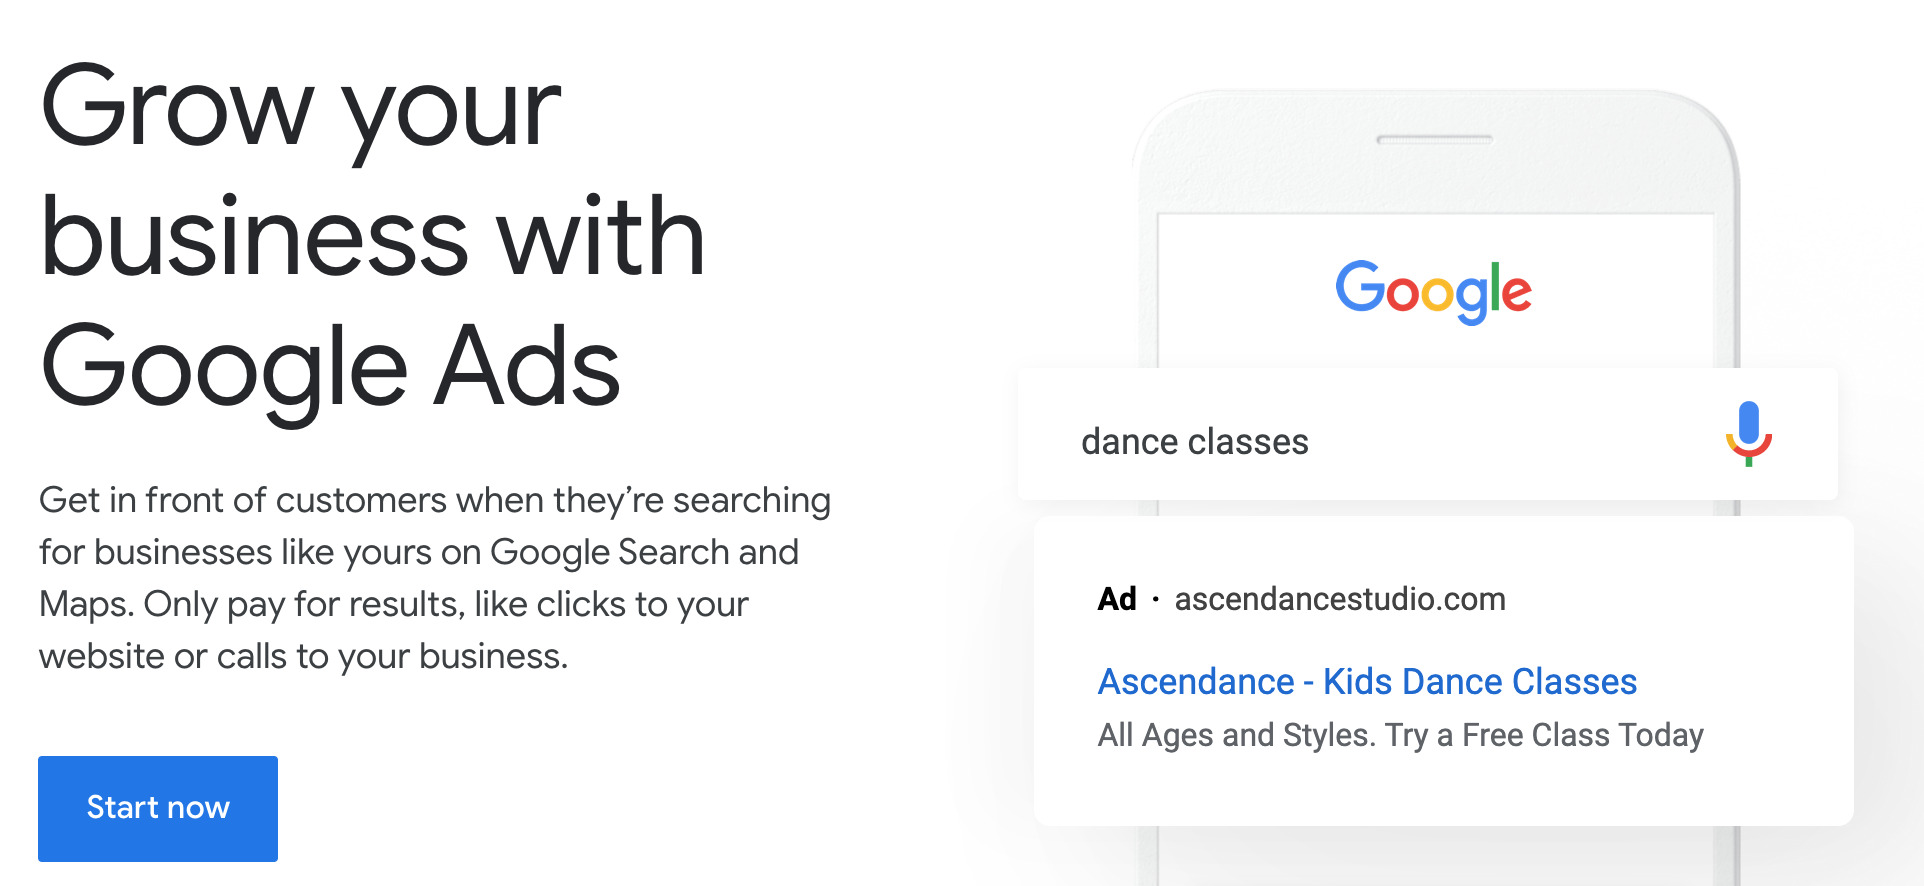 The Google Ads homepage, published to: "Google Ads Pros and Cons for Small Businesses" and "The Two Paid Online Advertising Options You Should Consider Using"